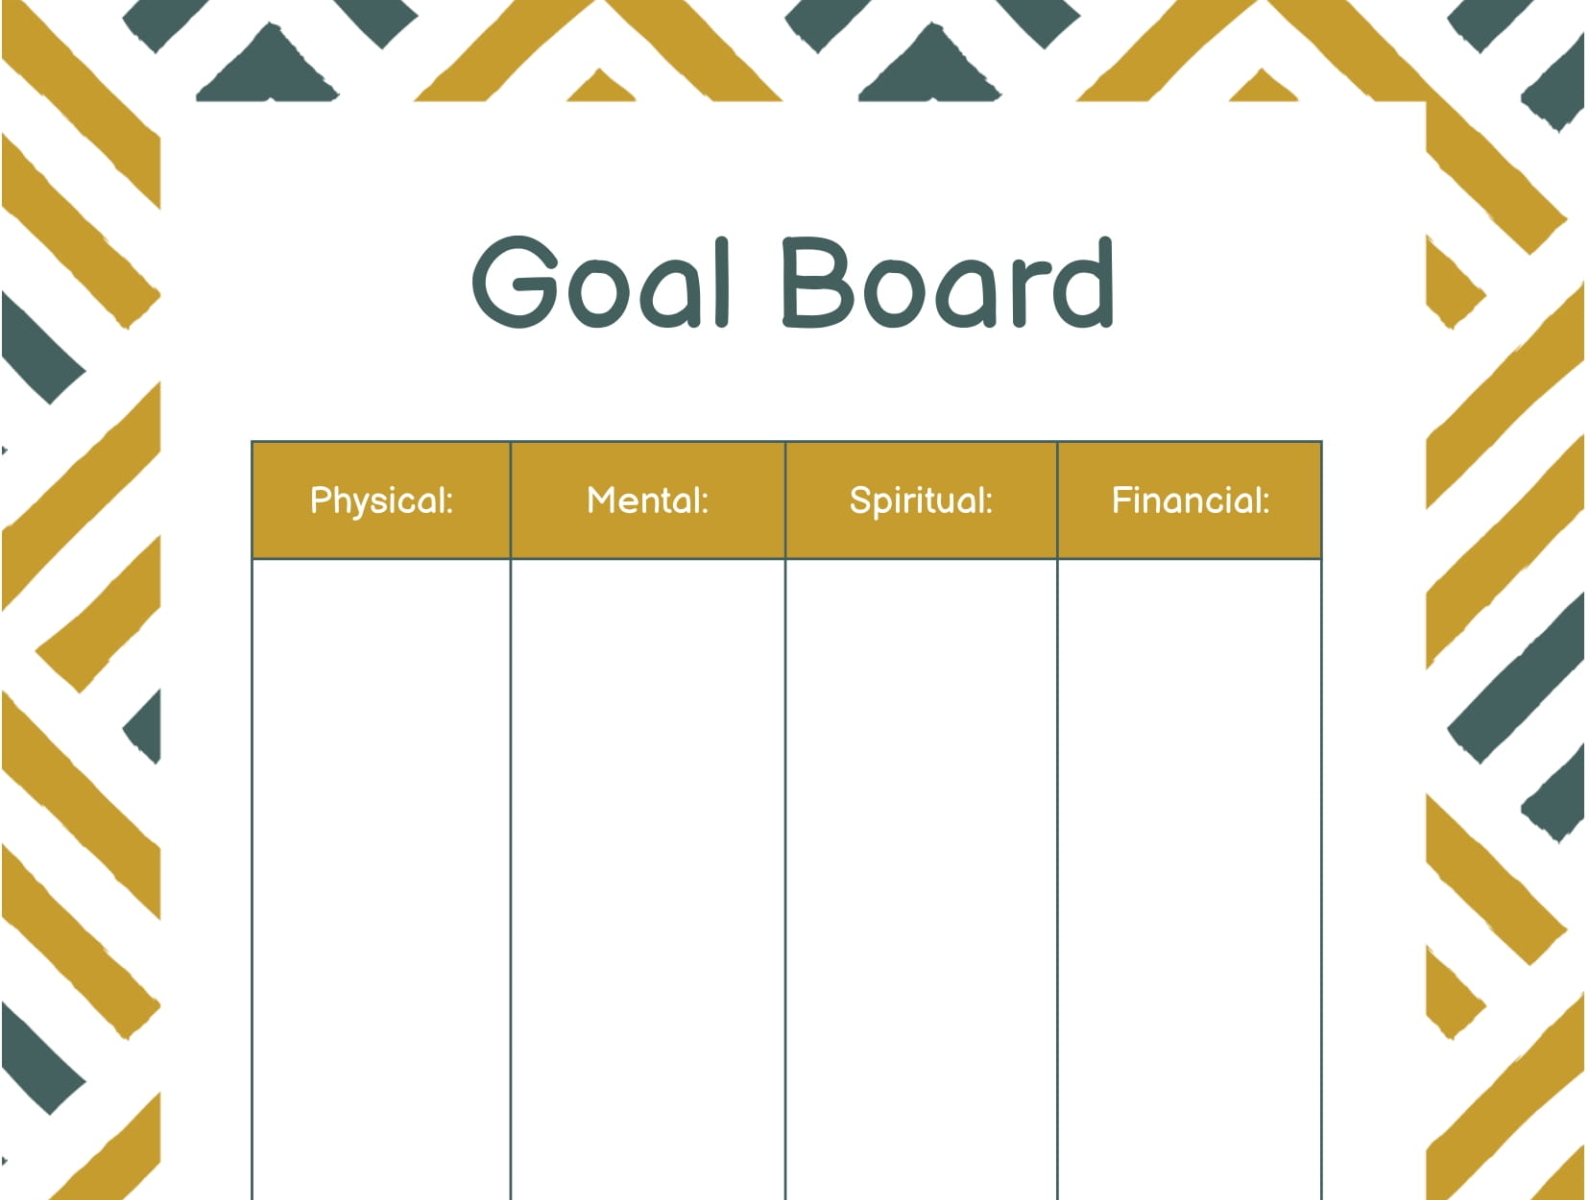 Goal Board Template by FREE Google Docs & Google Slide templates on